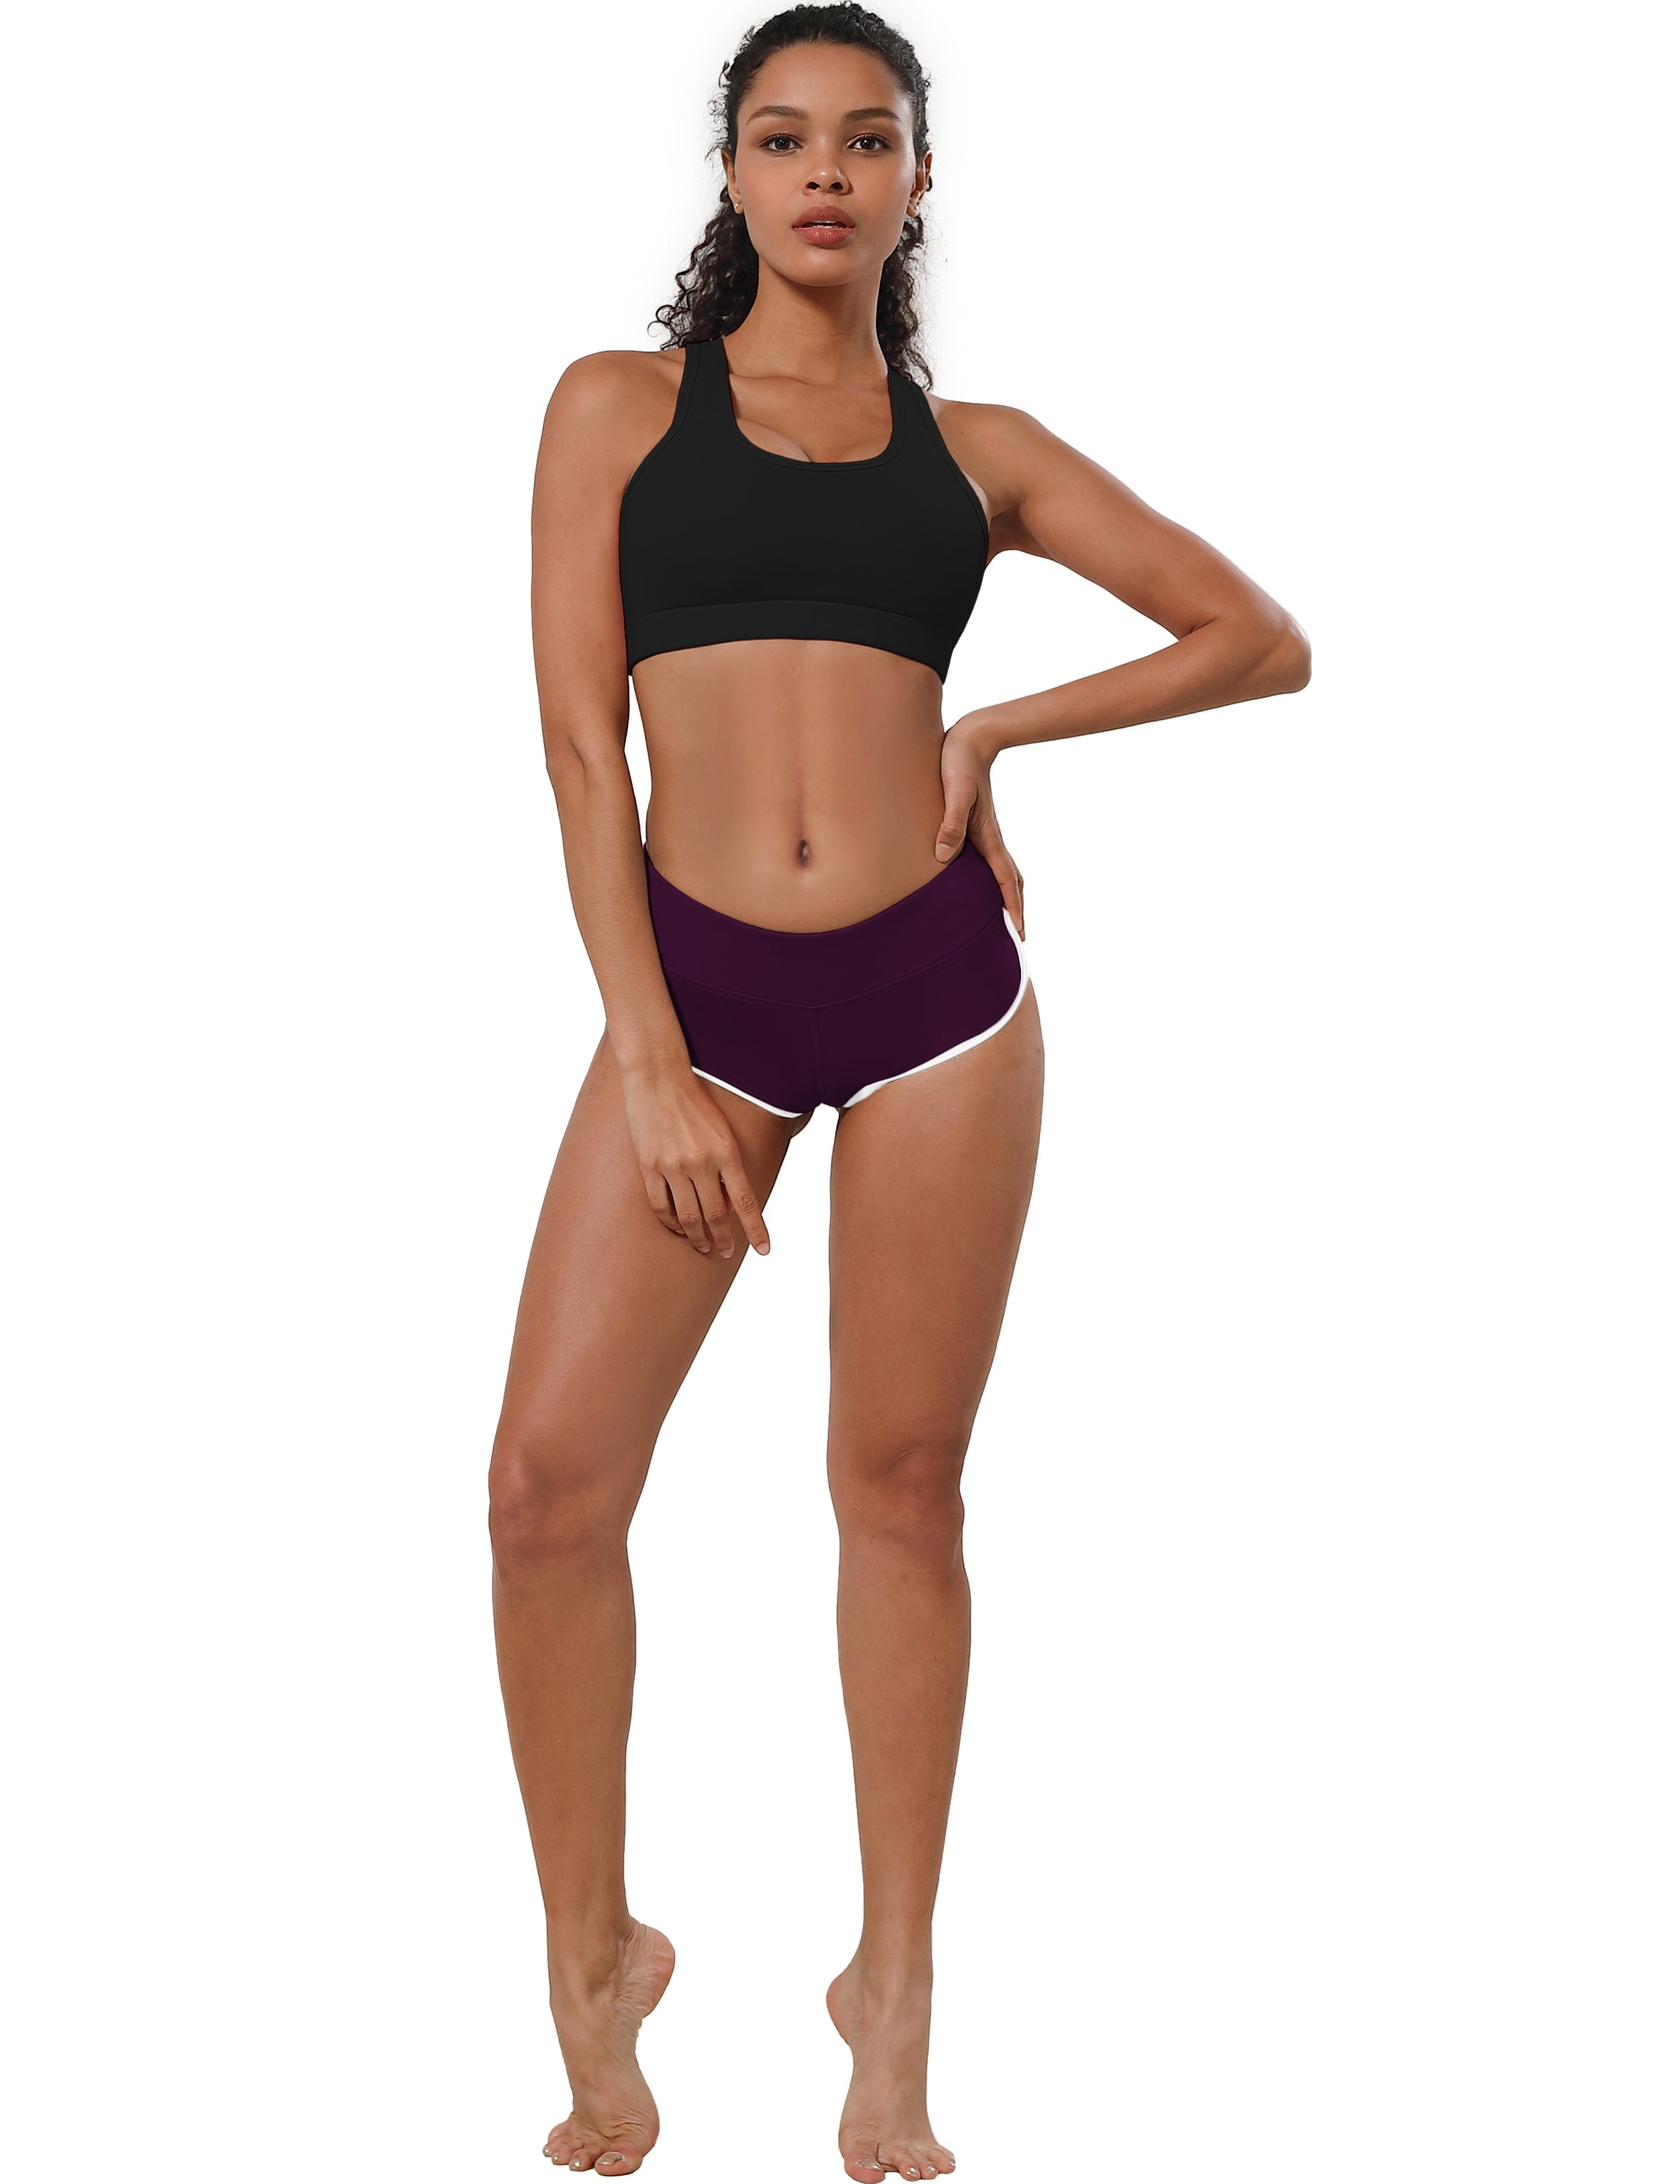 Sexy Booty Biking Shorts plum Sleek, soft, smooth and totally comfortable: our newest sexy style is here. Softest-ever fabric High elasticity High density 4-way stretch Fabric doesn't attract lint easily No see-through Moisture-wicking Machine wash 75%Nylon/25%Spandex